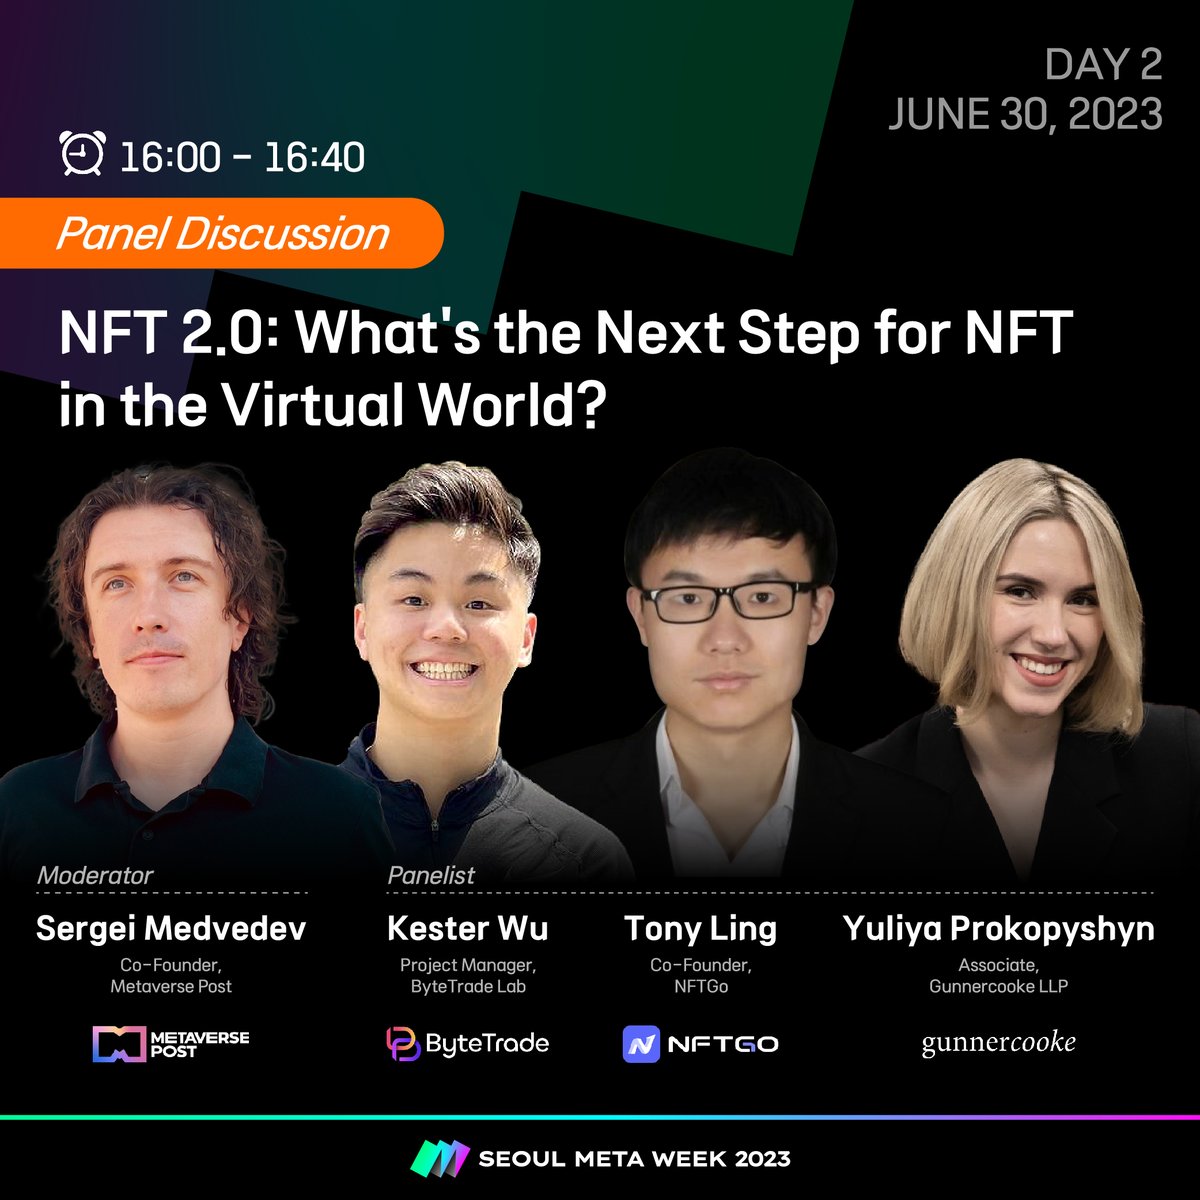 [DAY2] Panel Discussion) NFT 2.0: What's the Next Step for NFT in the Virtual World? ✅ [Moderator] Sergei MedvedevCo-Founder, Metaverse Post ✅ [Panelist] Kester Wu Project Manager, ByteTrade Lab Tony Ling Co-Founder, NFTGo Yuliya Prokopyshyn Associate, Gunnercooke LLP